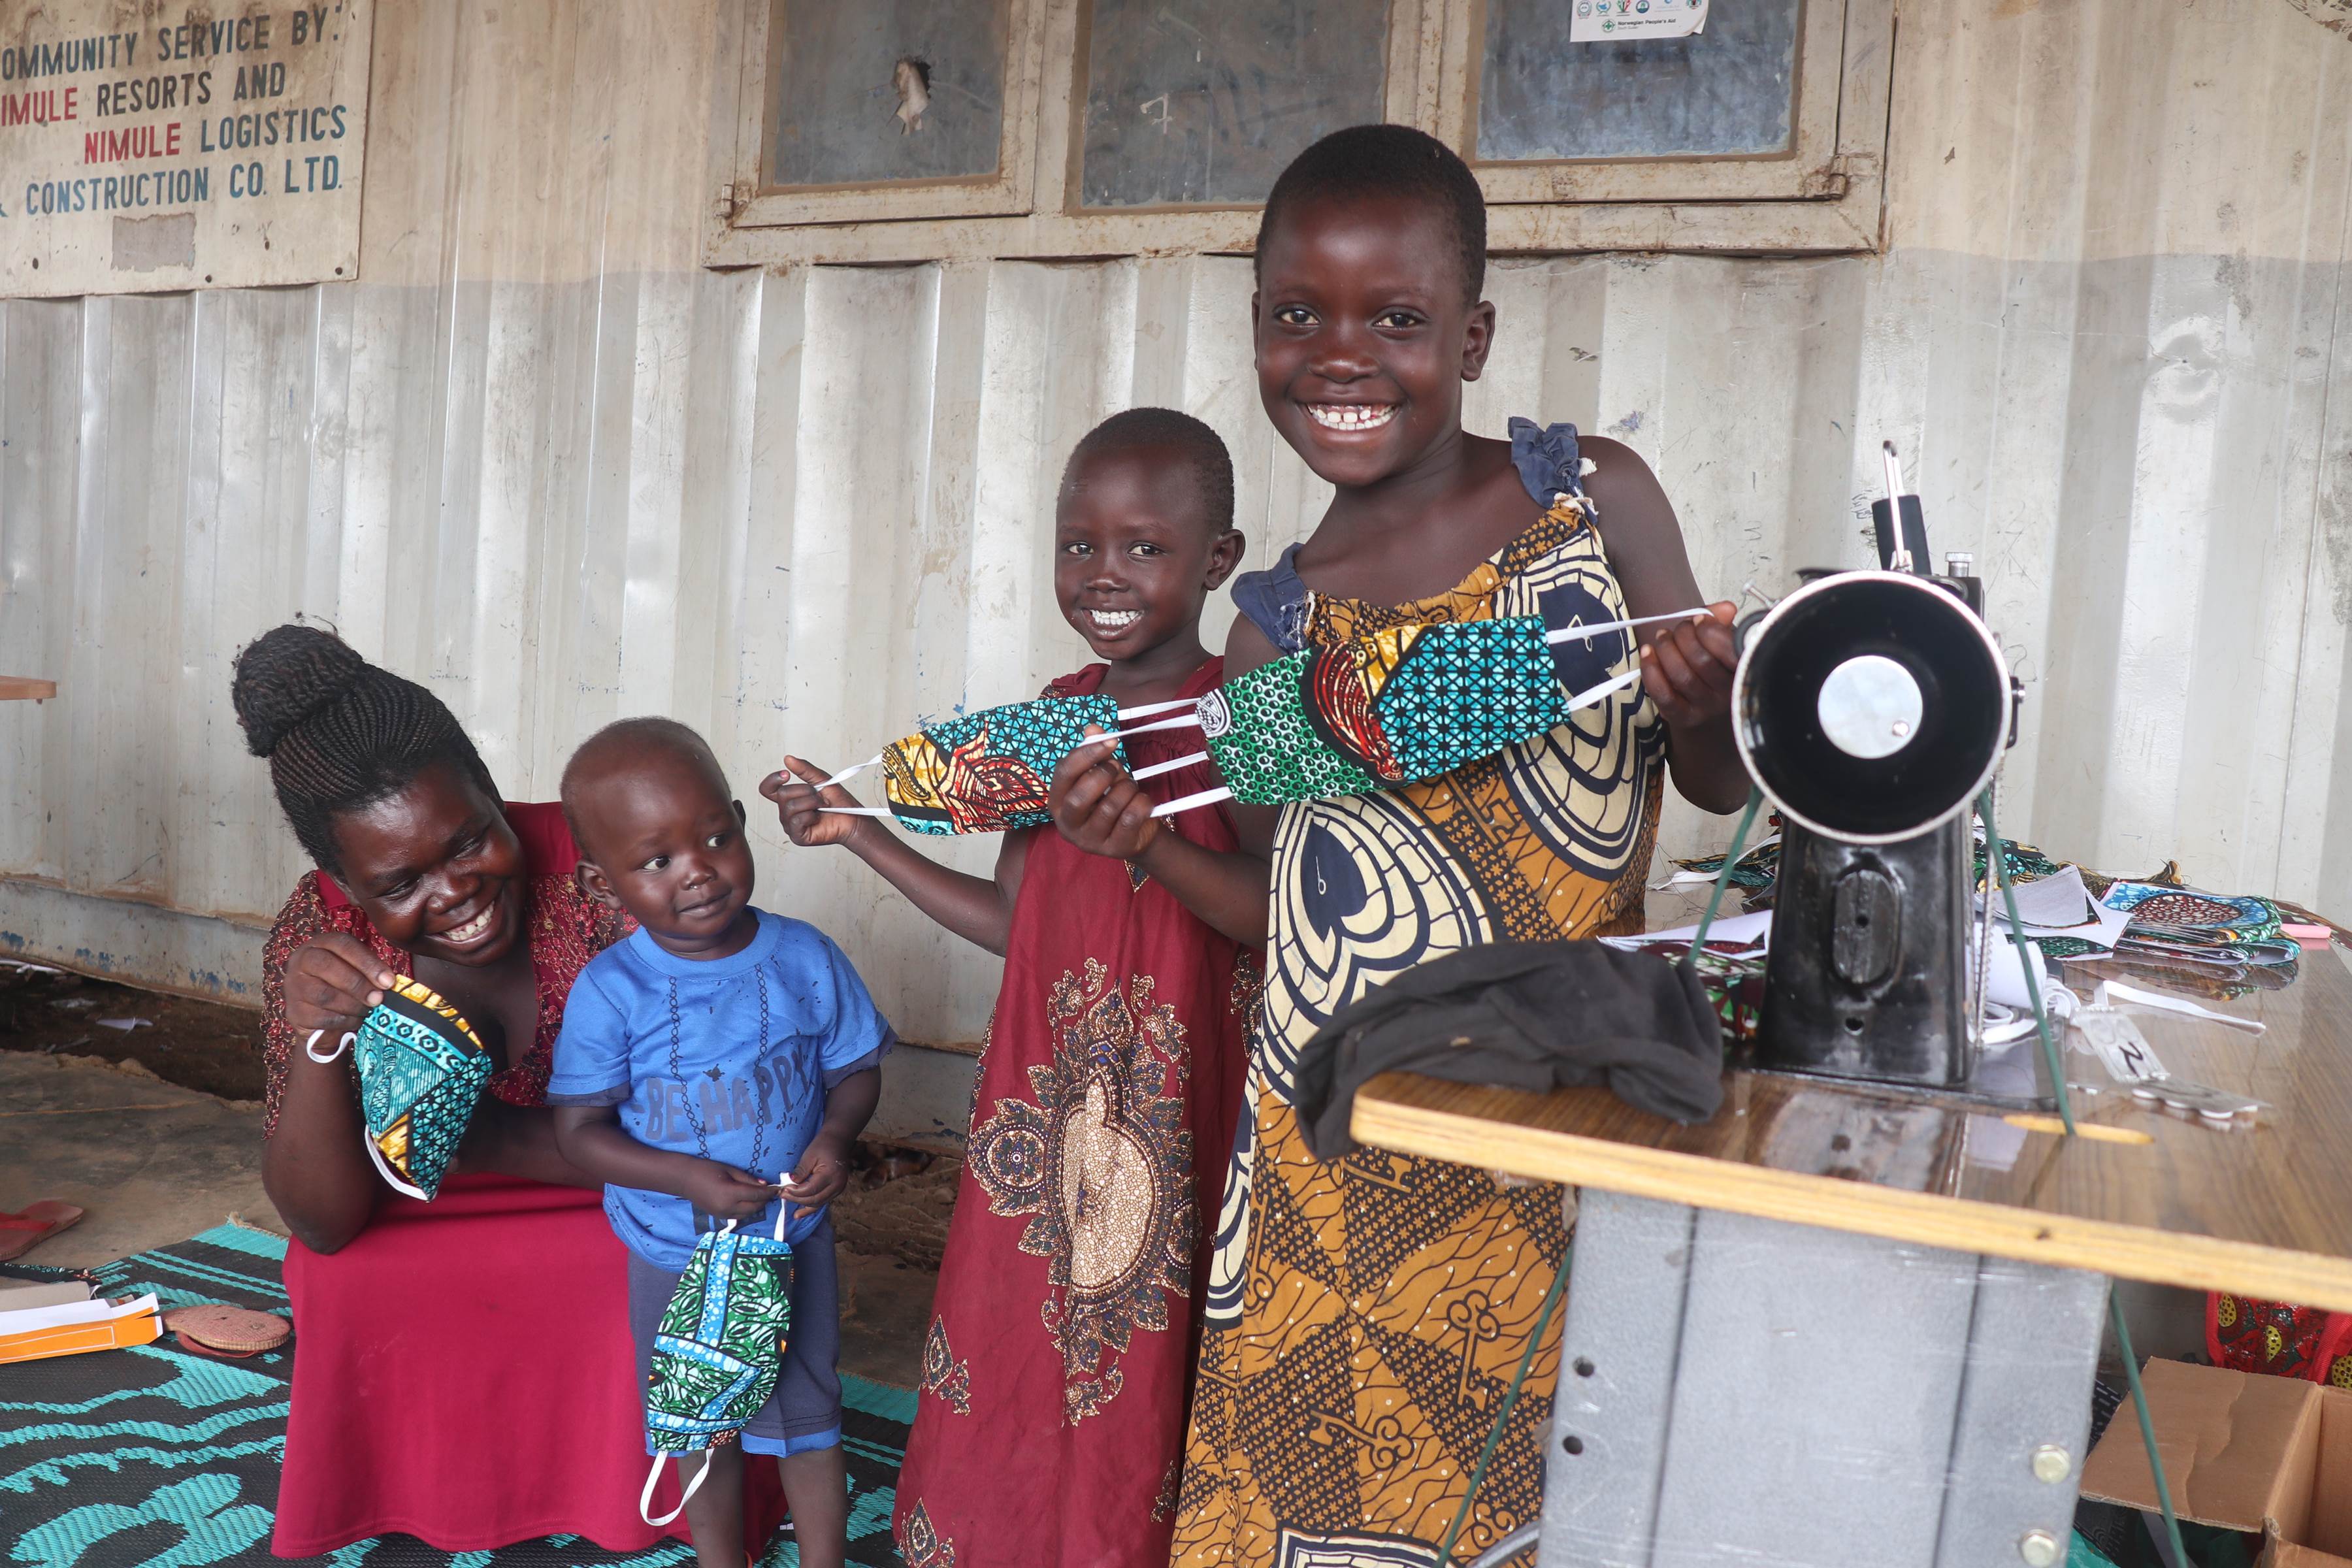 Two women and two children smile and hold out garments, standing next to a sewing machine in South Sudan